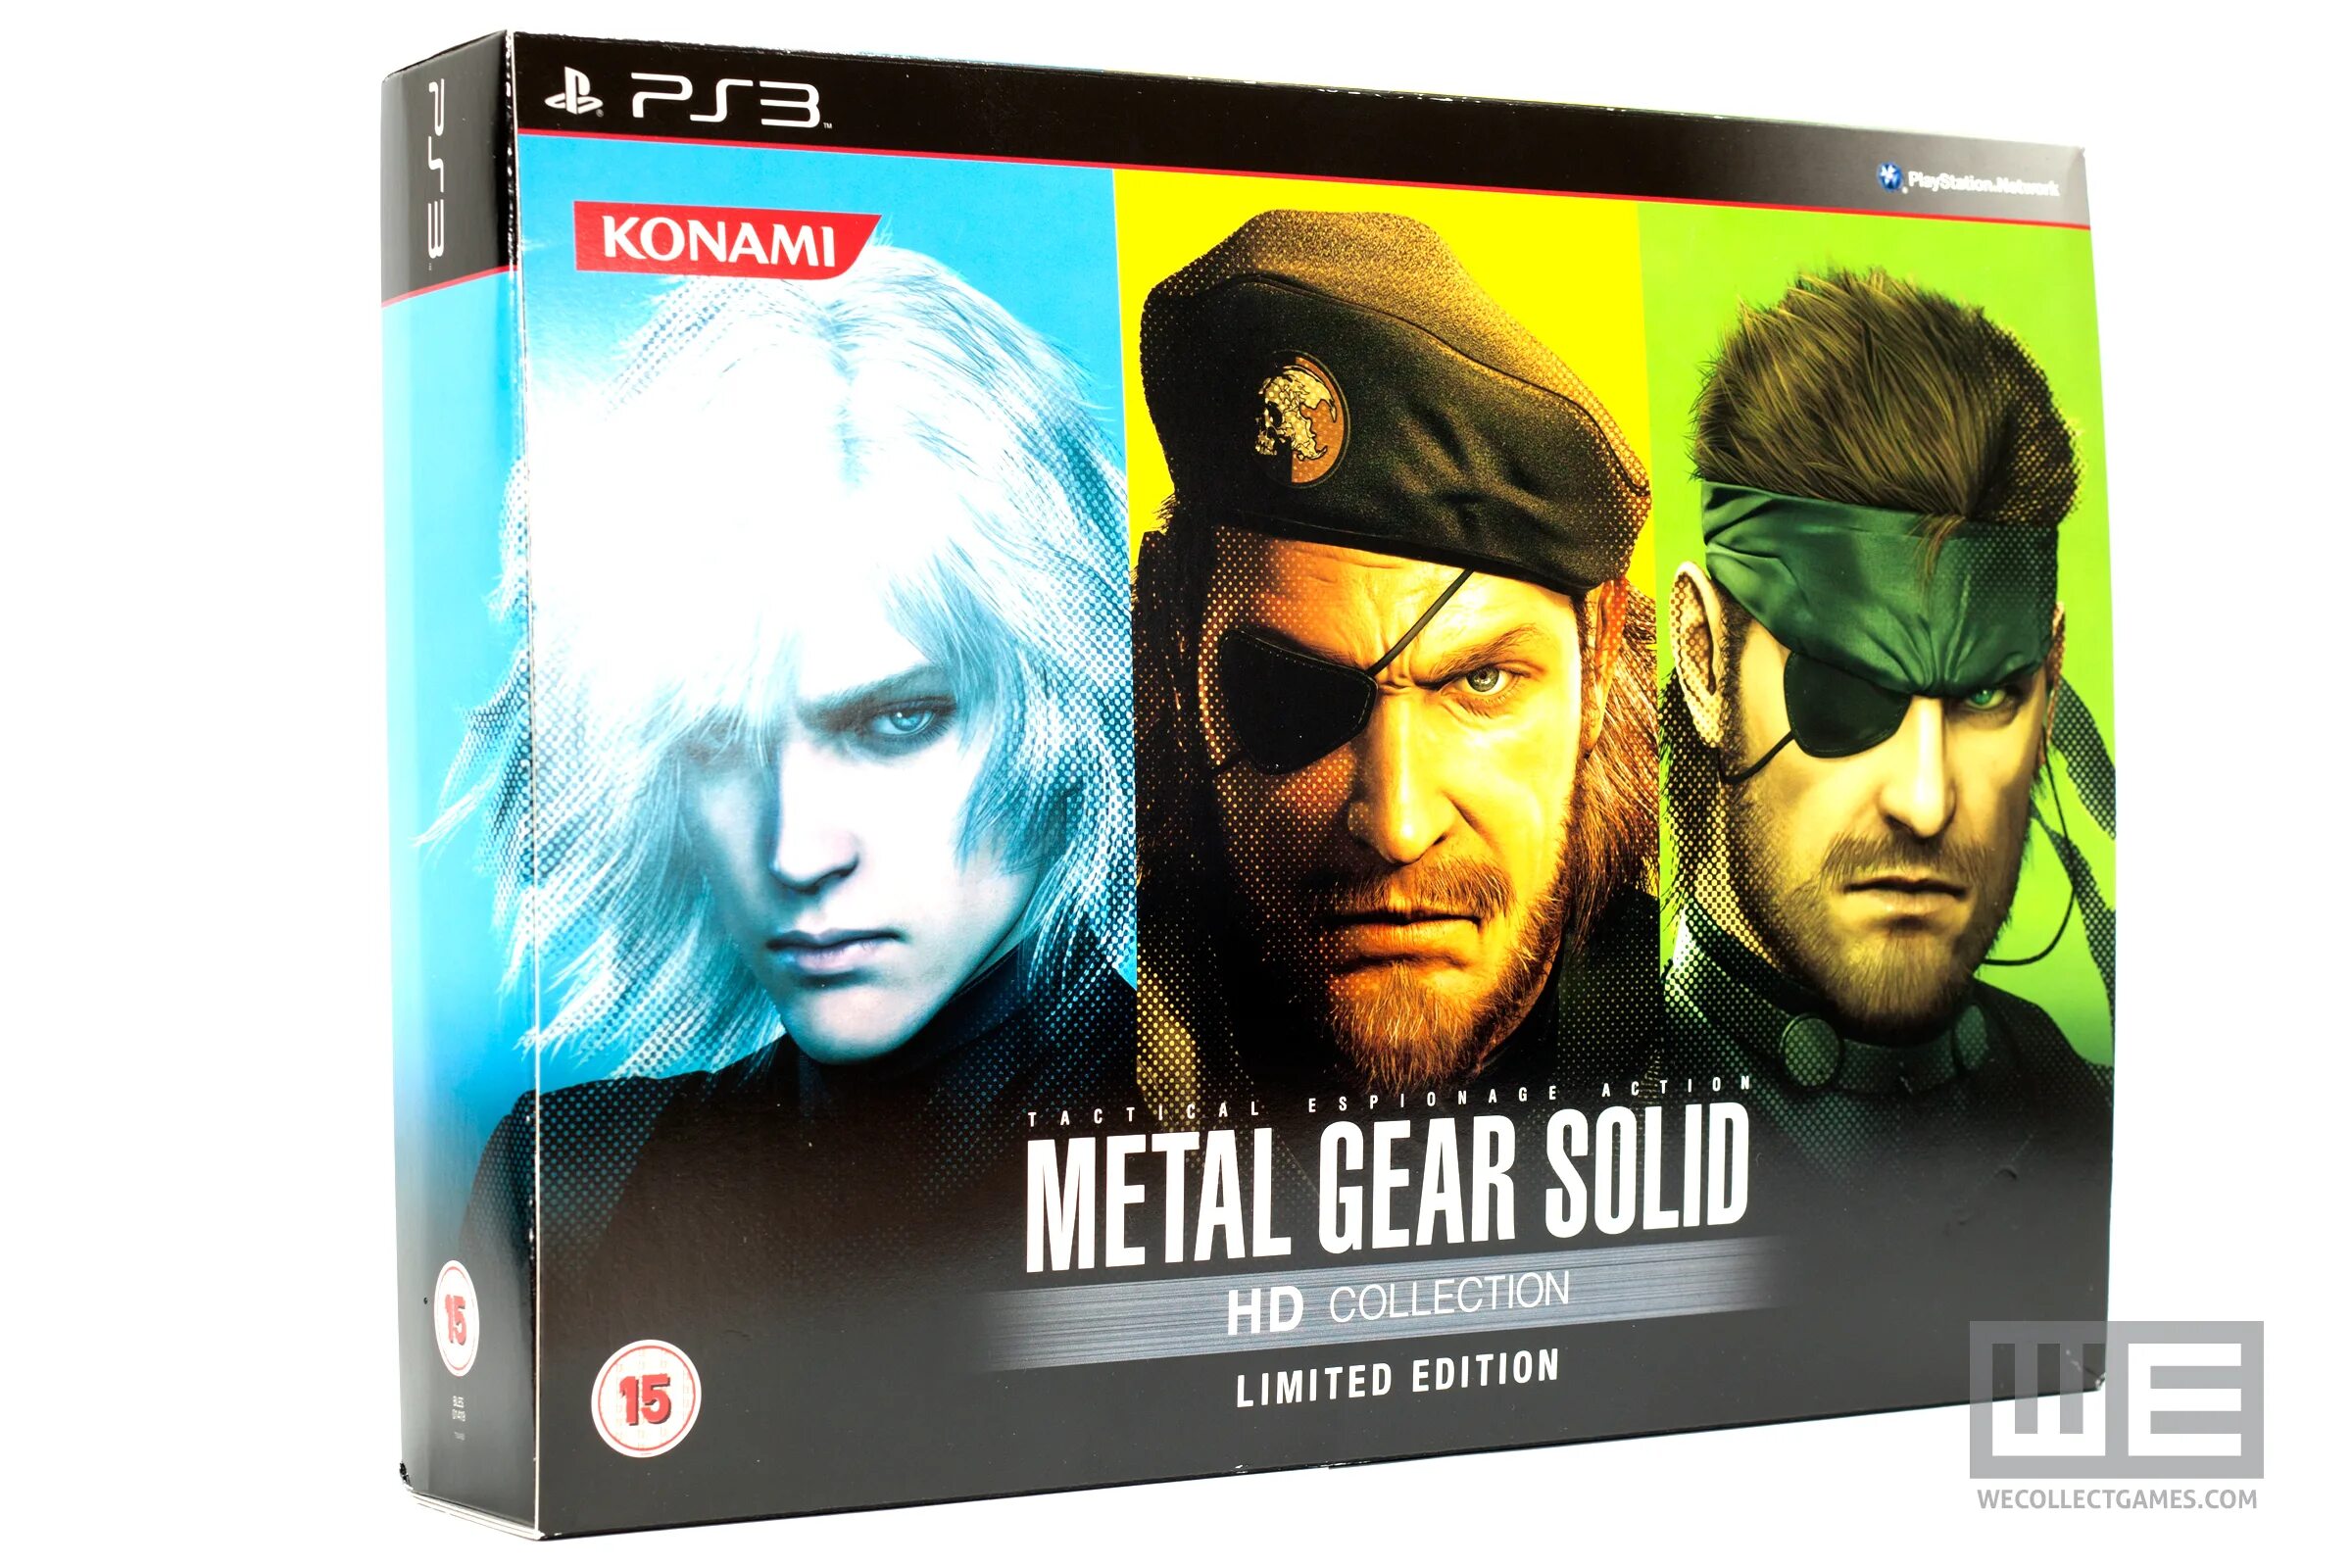 Mgs 3 master collection. MGS collection ps4.